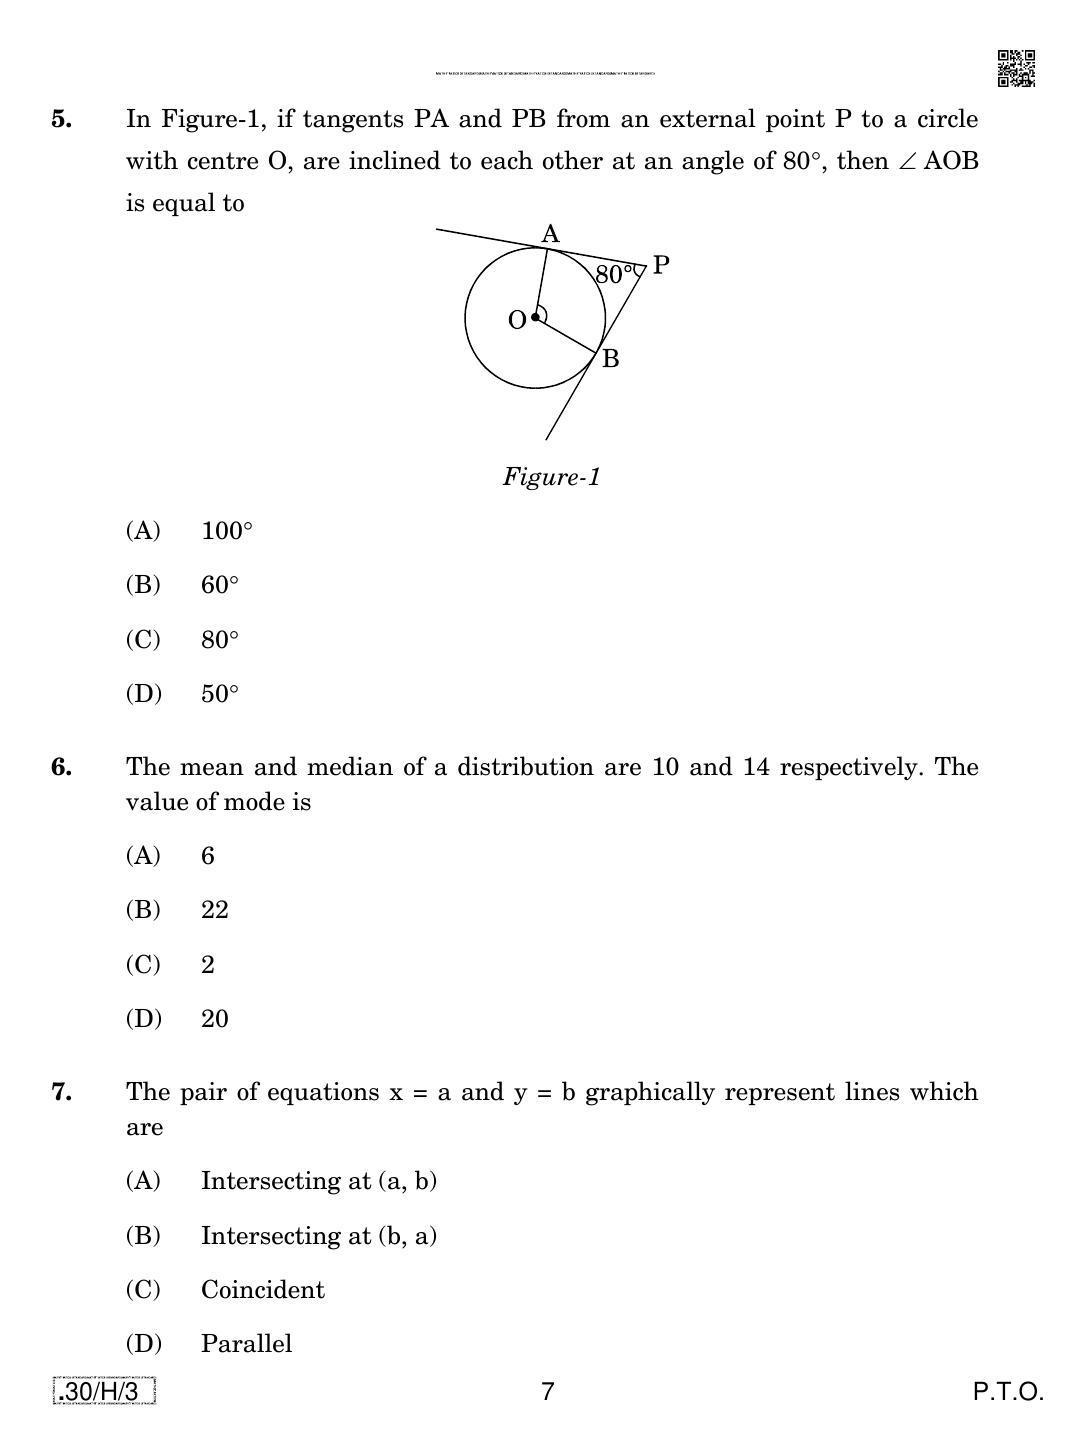 CBSE Class 10 30-C-3 - Maths (Standard) 2020 Compartment Question Paper - Page 7